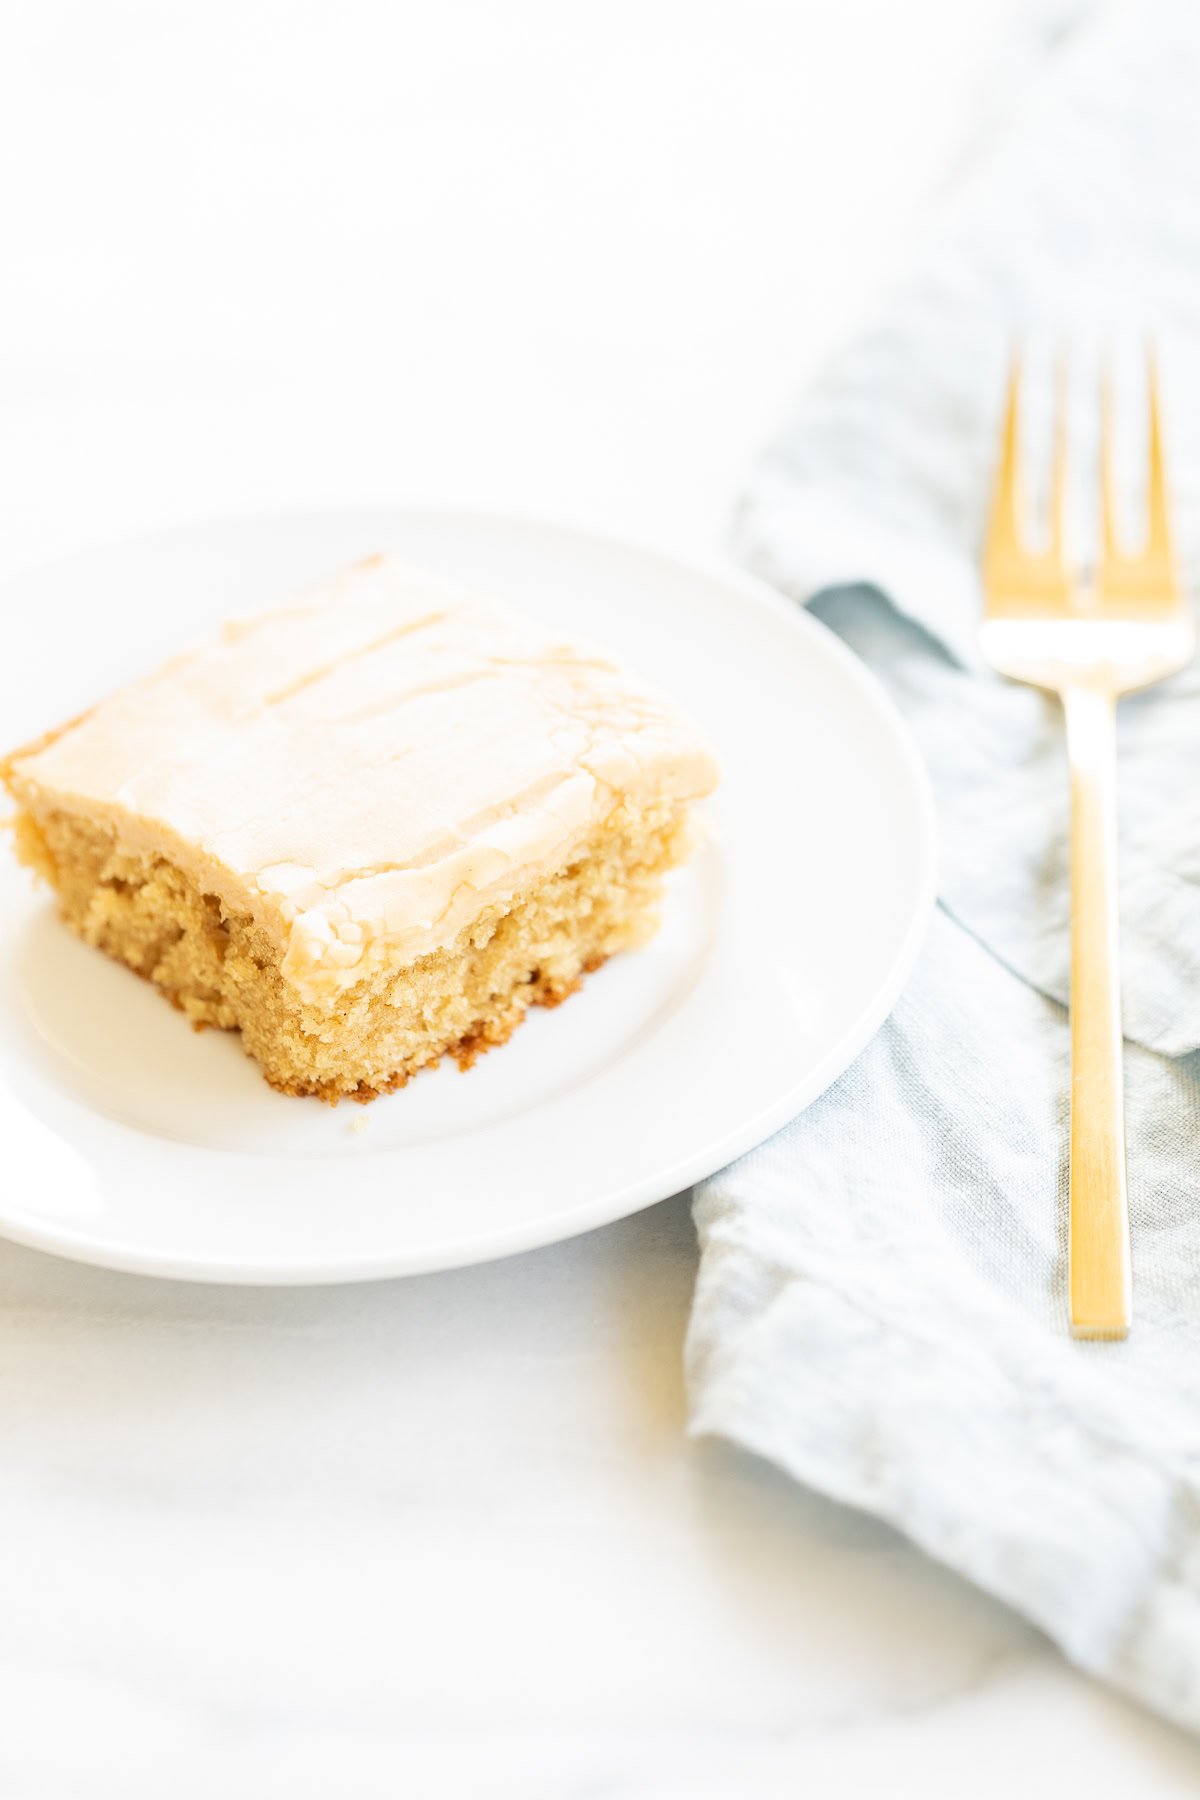 A piece of peanut butter frosted cake on a white plate with a gold fork on a light blue napkin, set against a bright background.